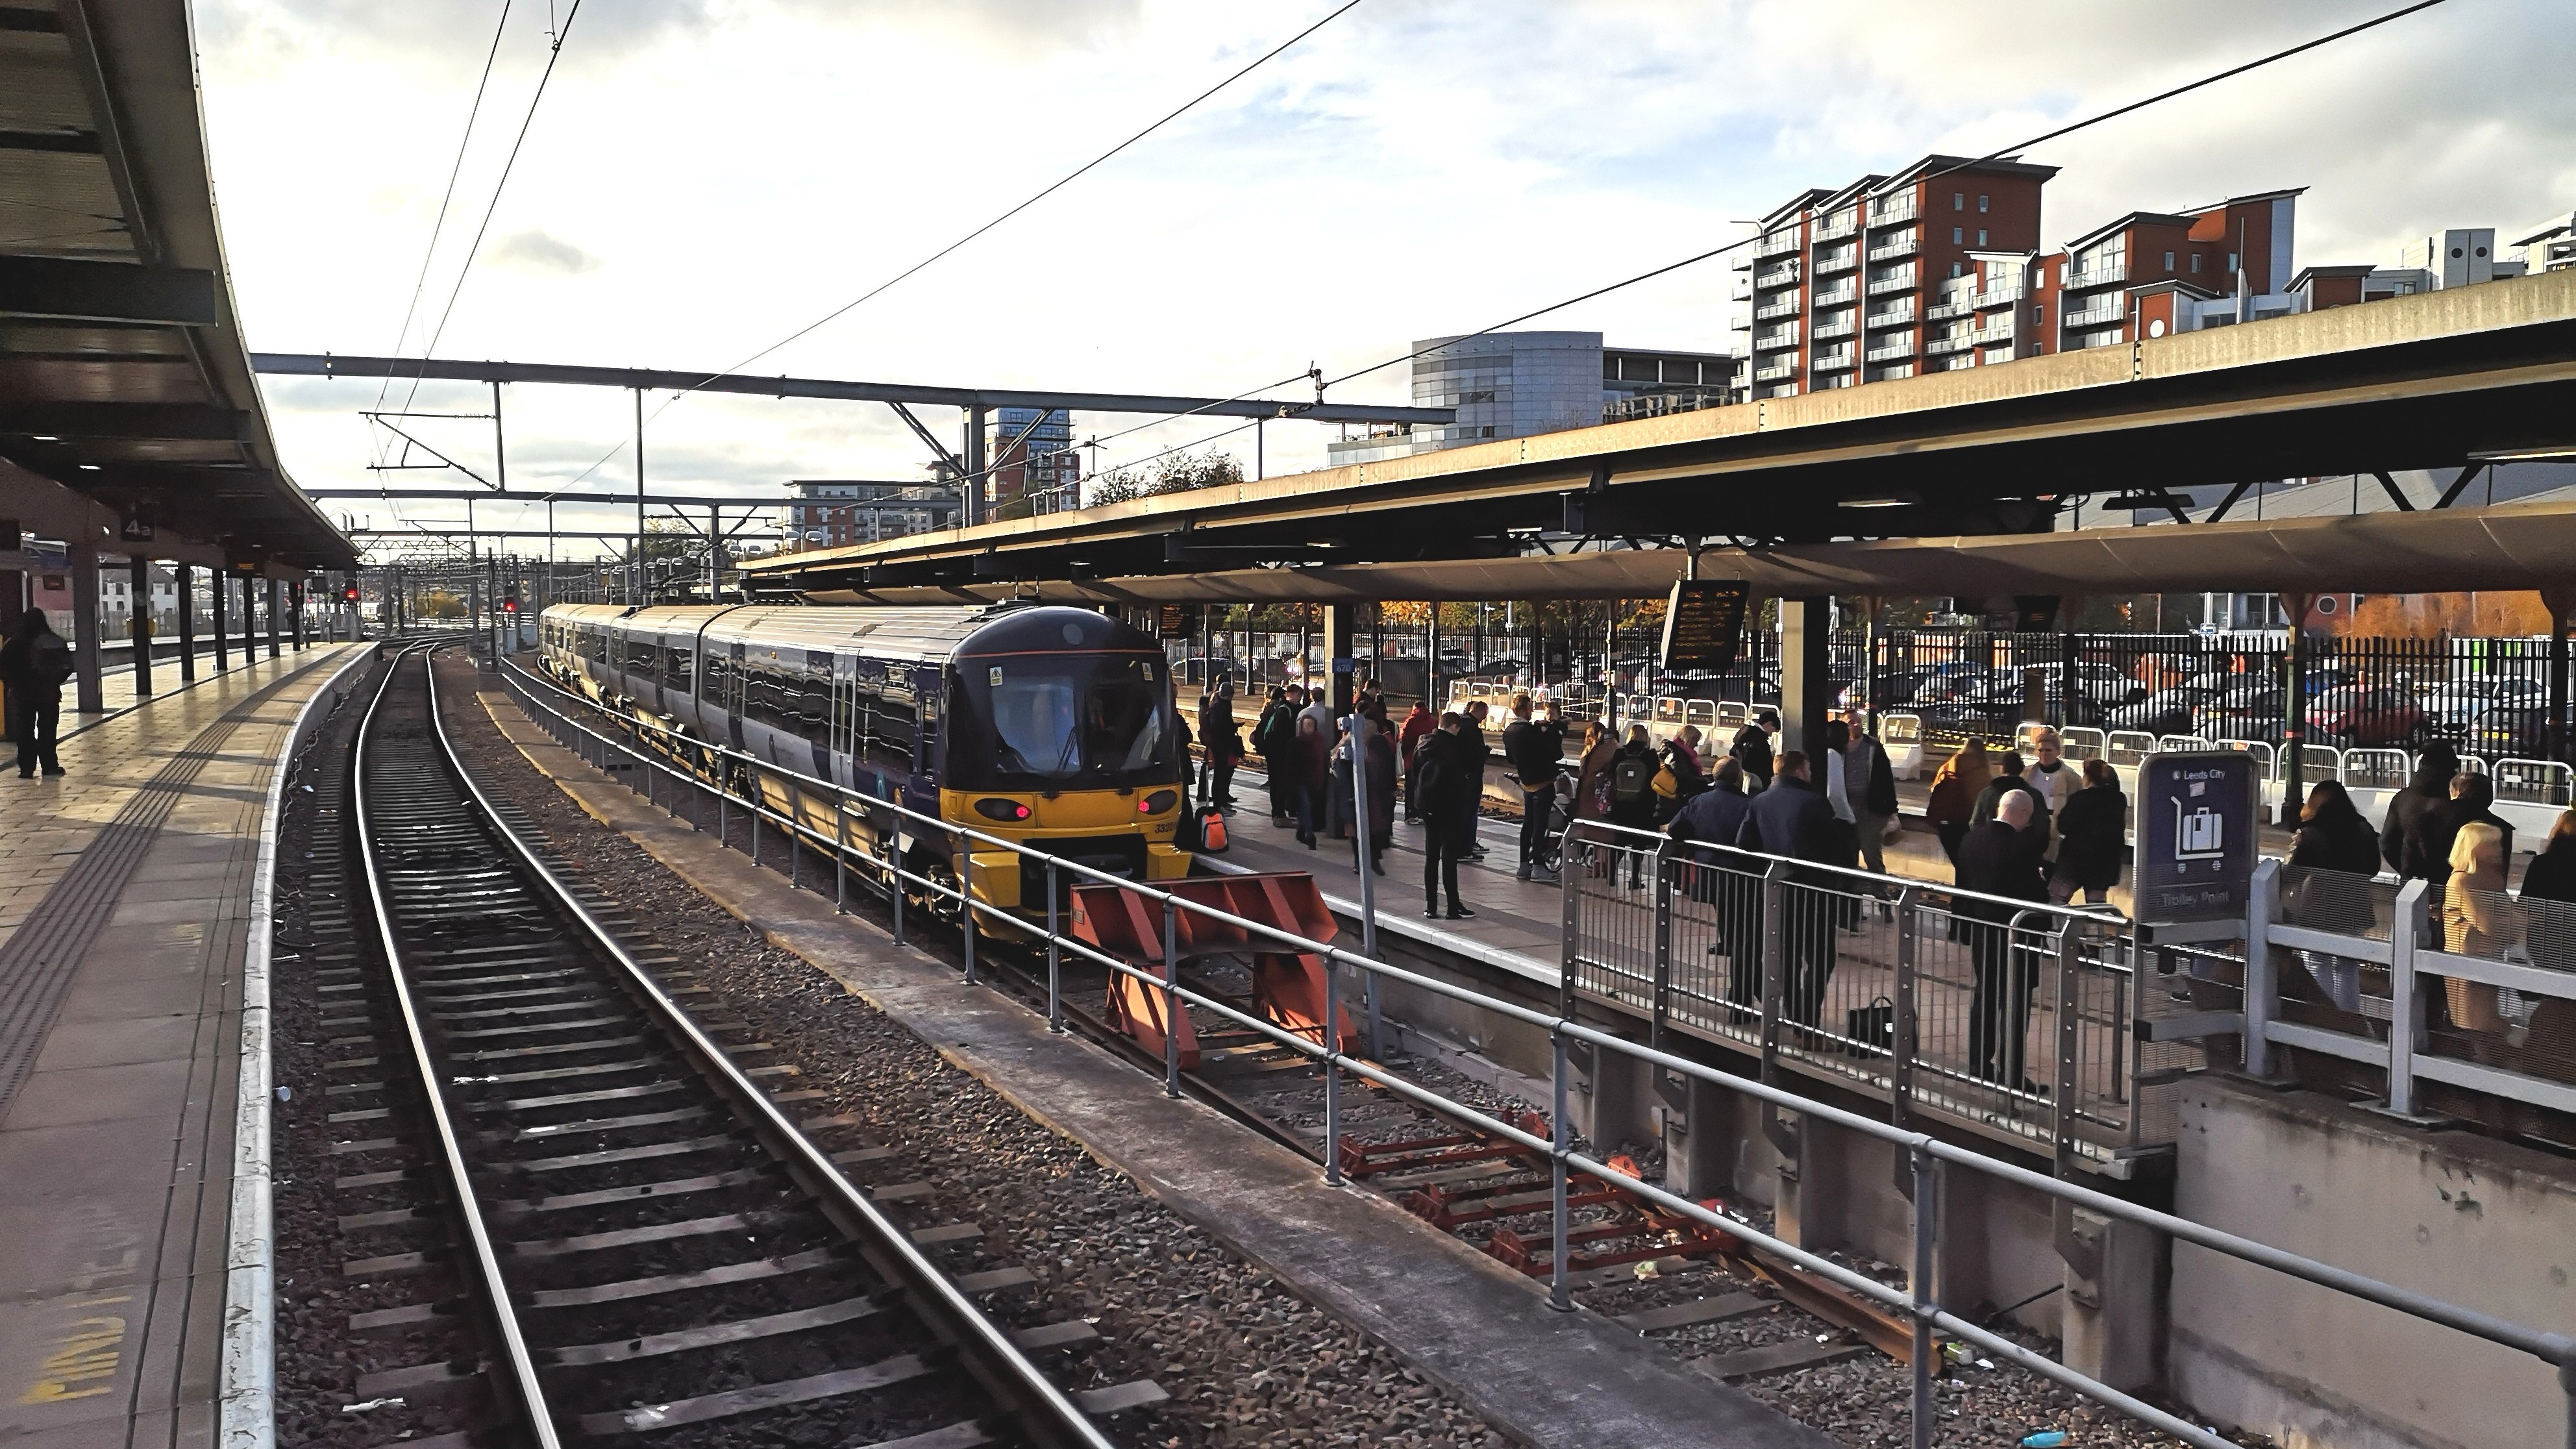 Further changes for West Yorkshire passengers over the Christmas period